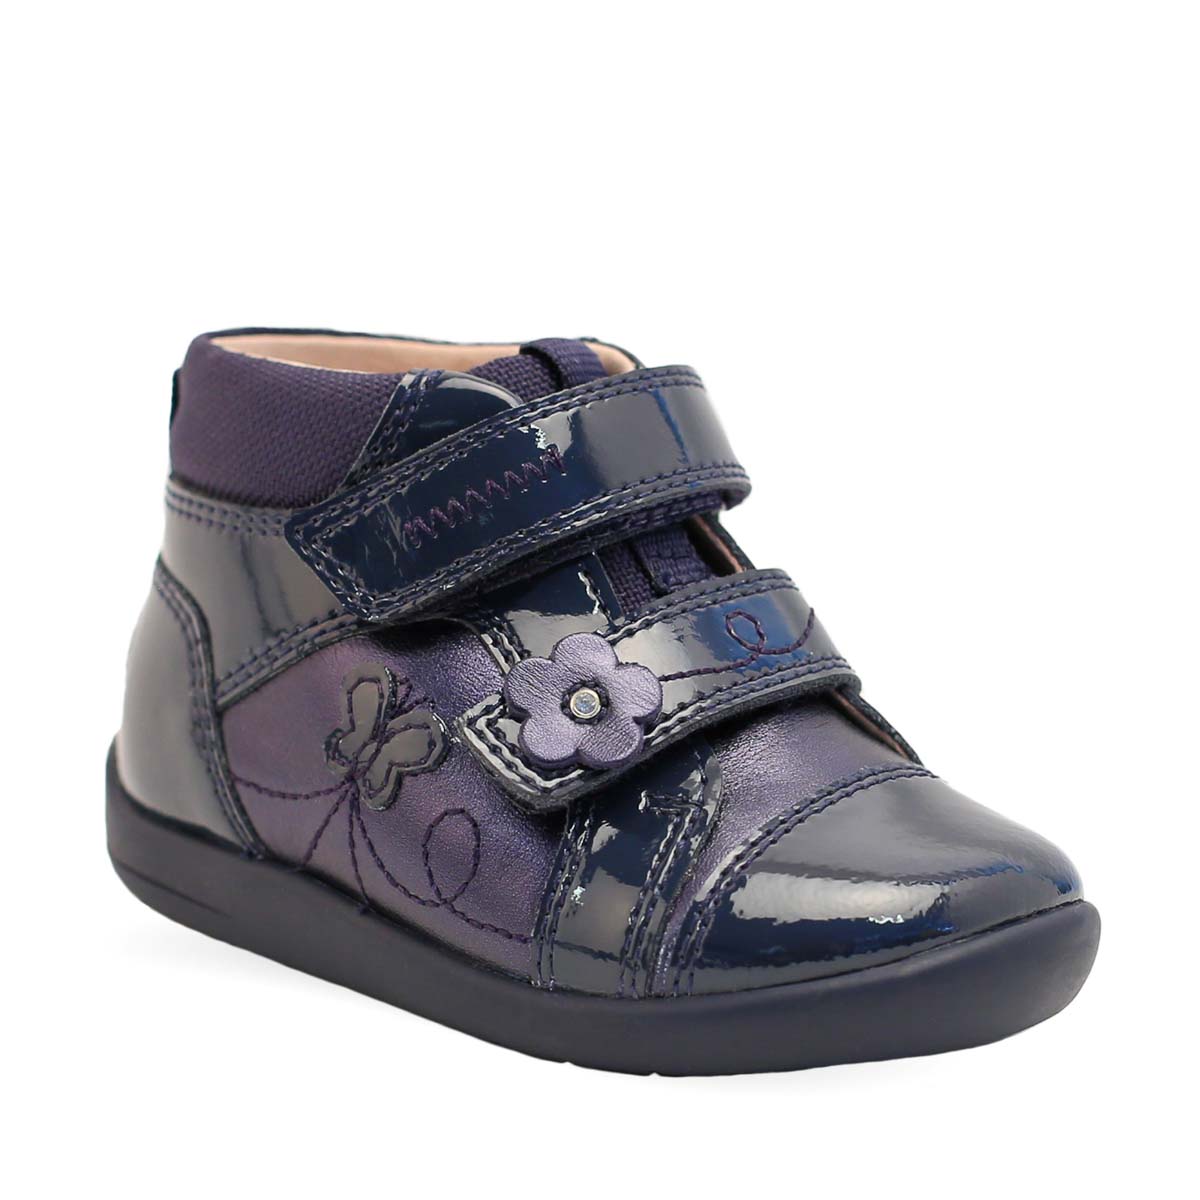 Start Rite - Daydream 2V In Navy Patent 0792-96F In Size 6.5 In Plain Navy Patent Infant Girls Boots  In Navy Patent For kids